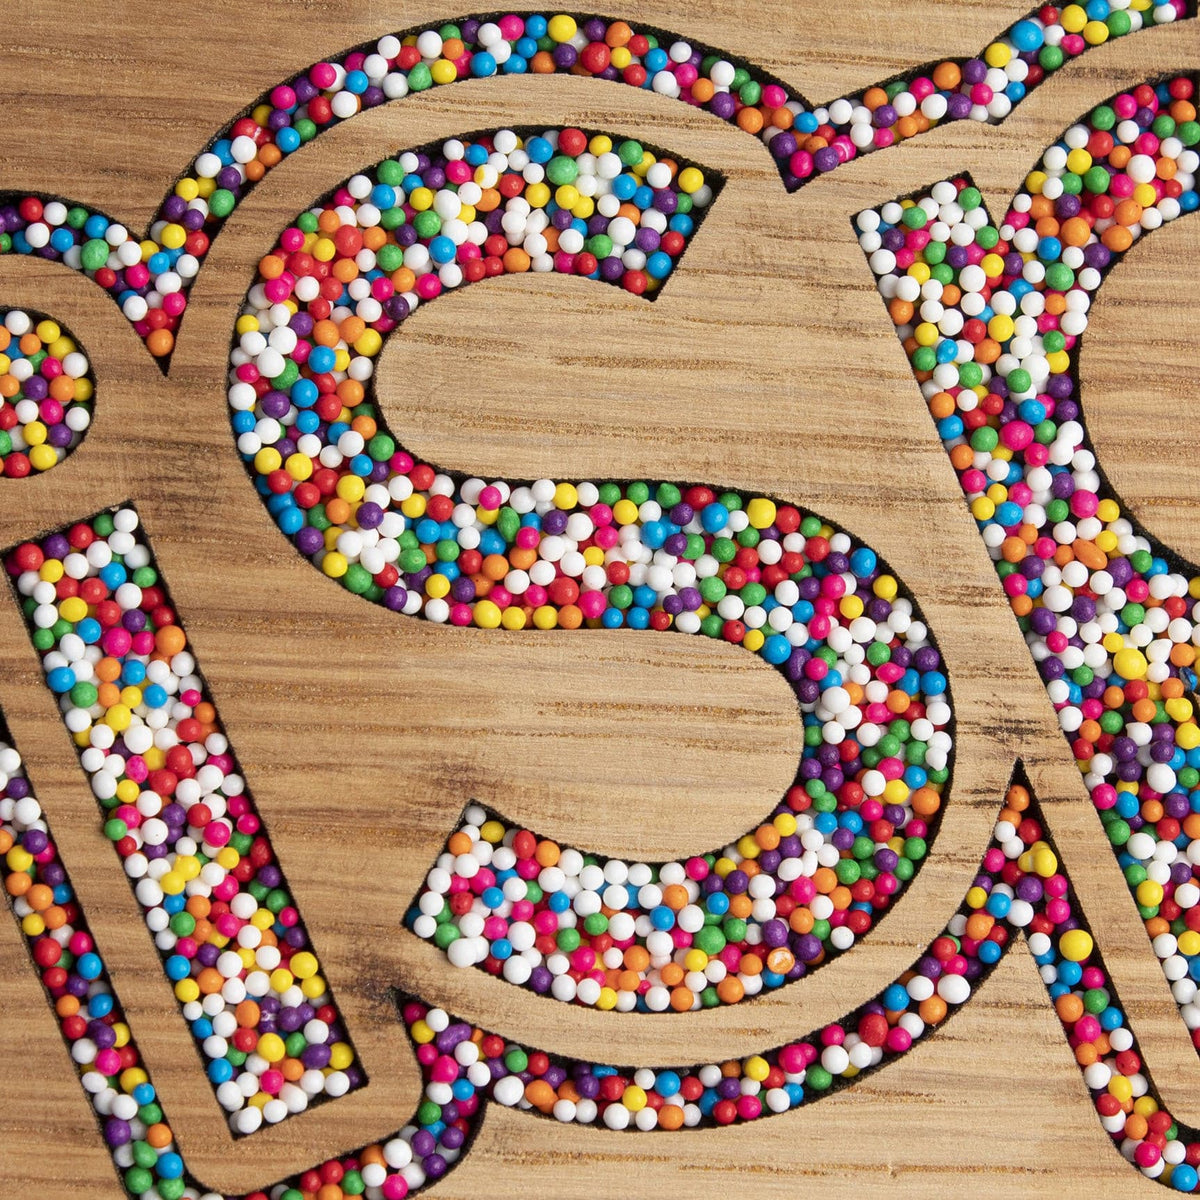 Get Creative With Your Baked Goods And Add Some Rainbow Nonpareils Sprinkles!